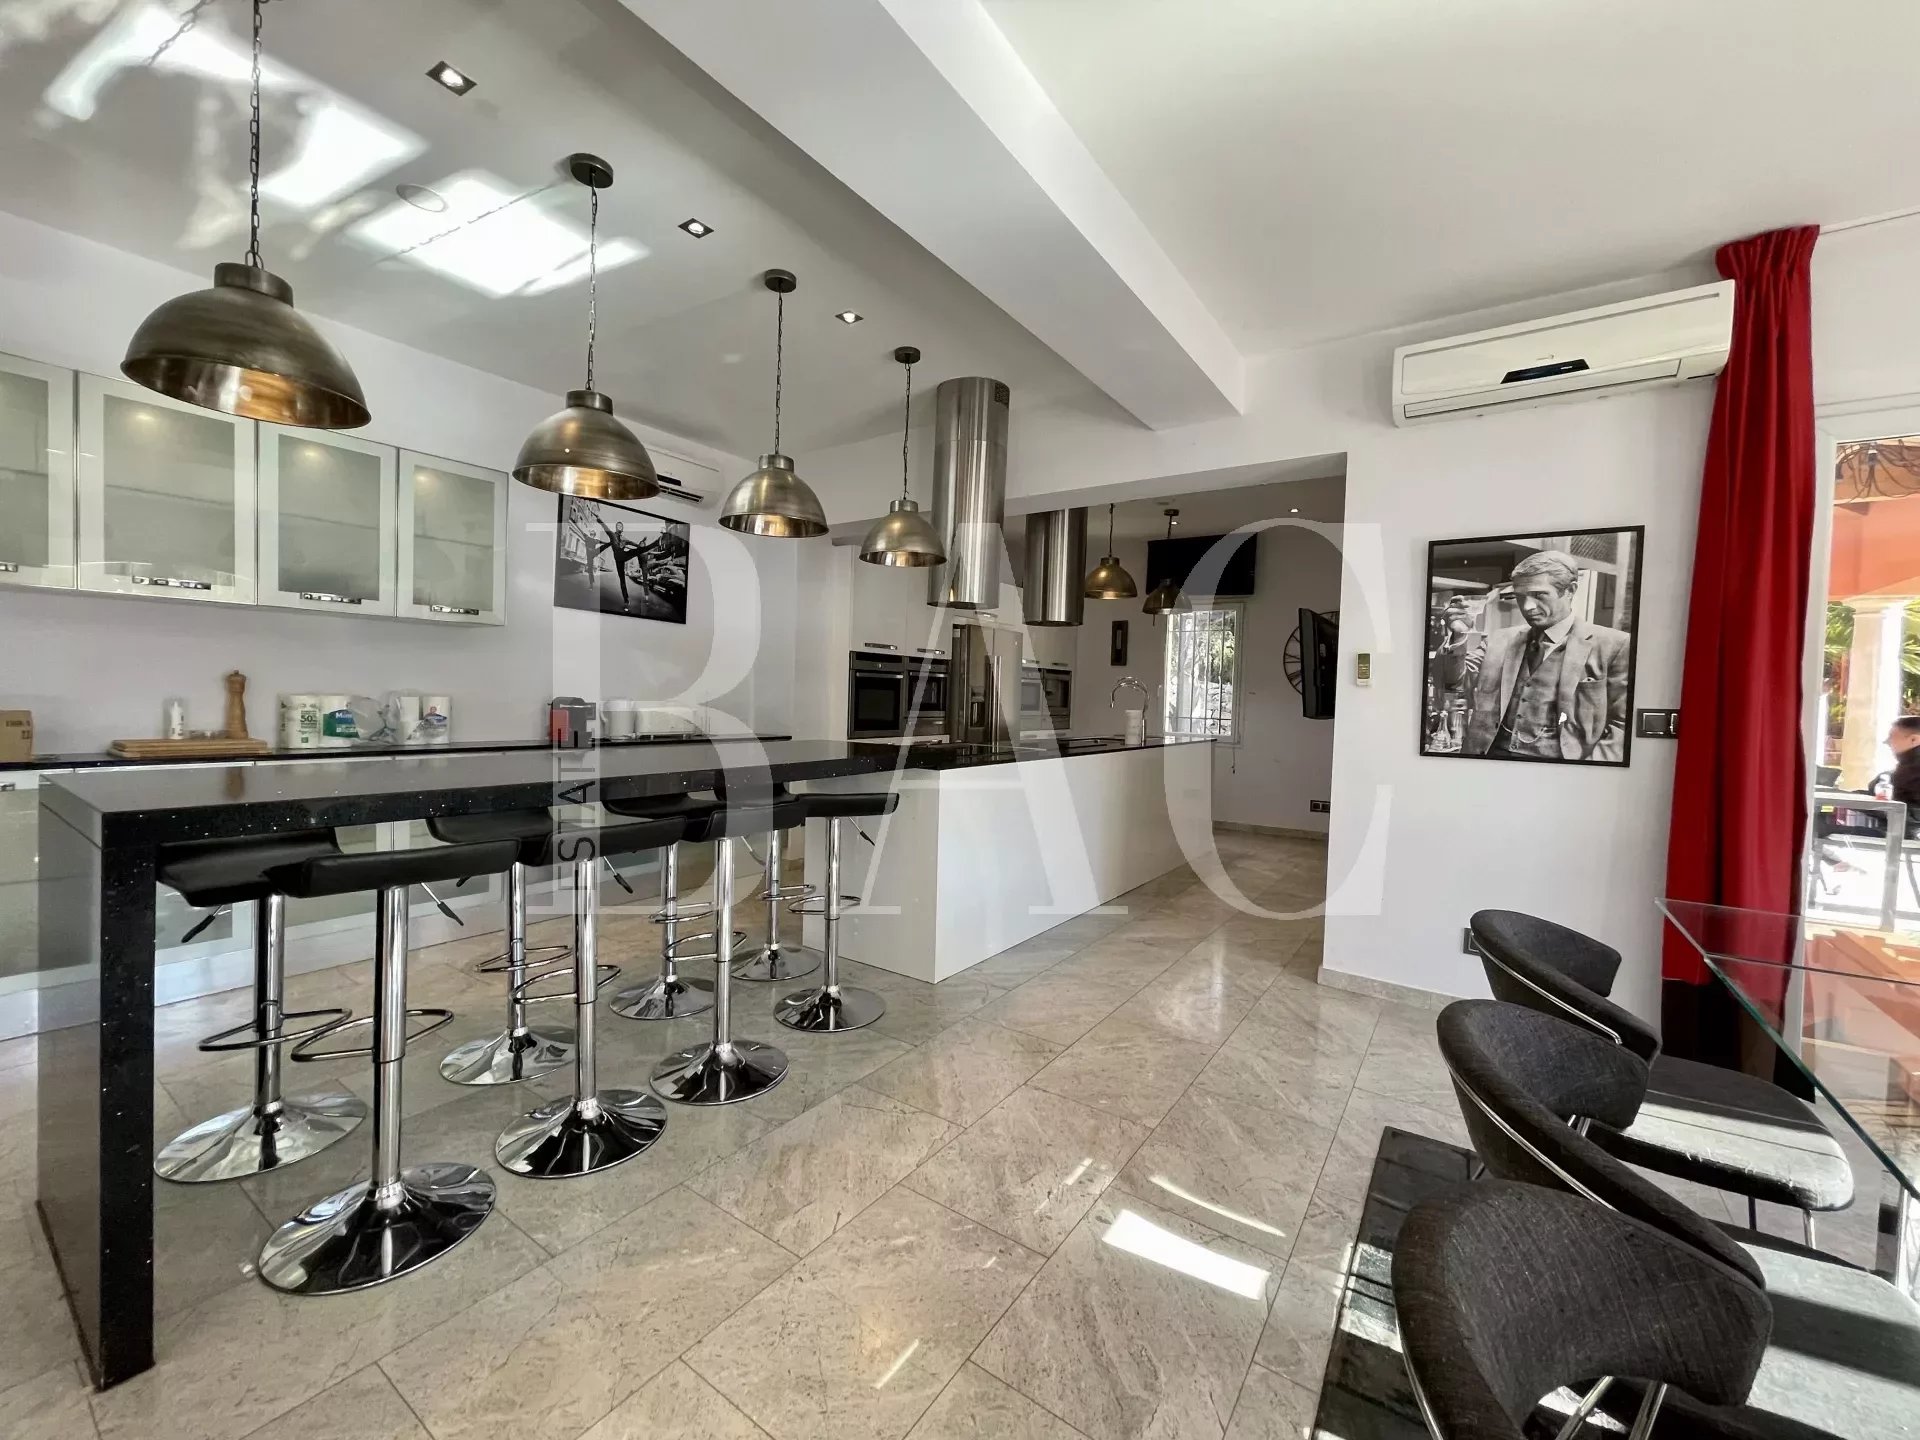 Quiet property, 30 minutes from the beaches and the center of Cannes